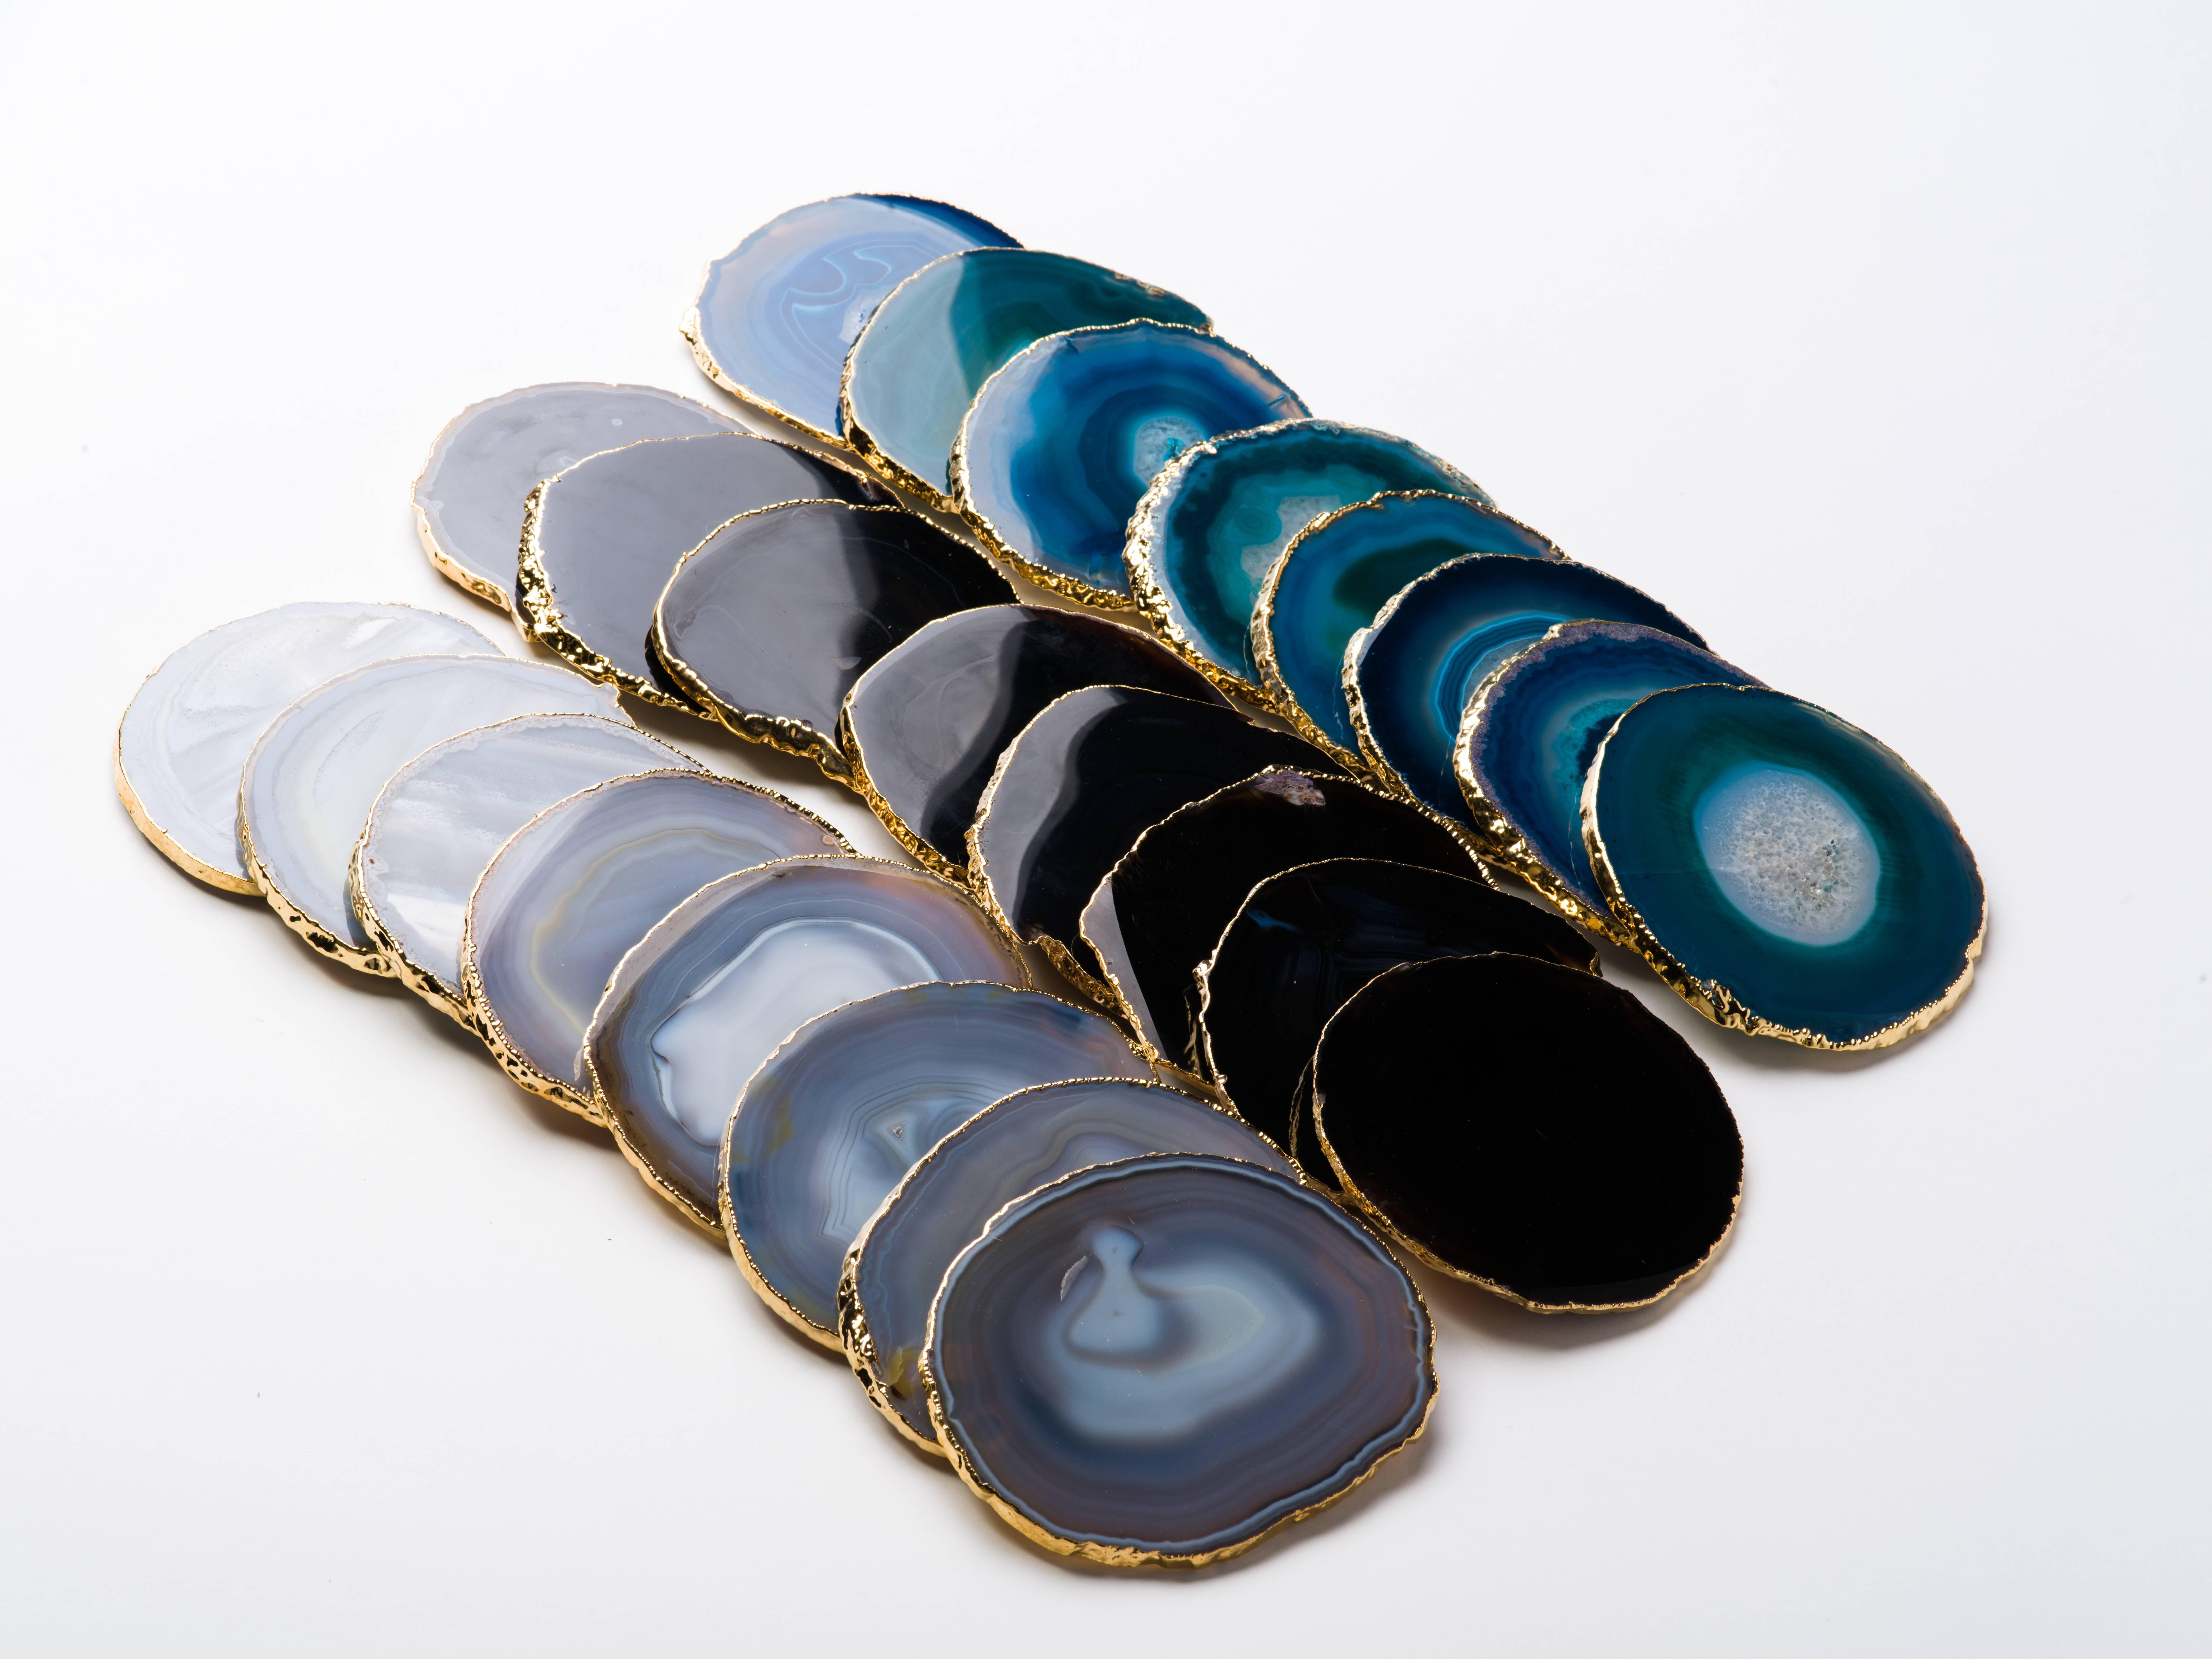 Natural Black Agate Gemstone Coasters with 24 K Gold Trim, Set/8 In Excellent Condition For Sale In Fort Lauderdale, FL